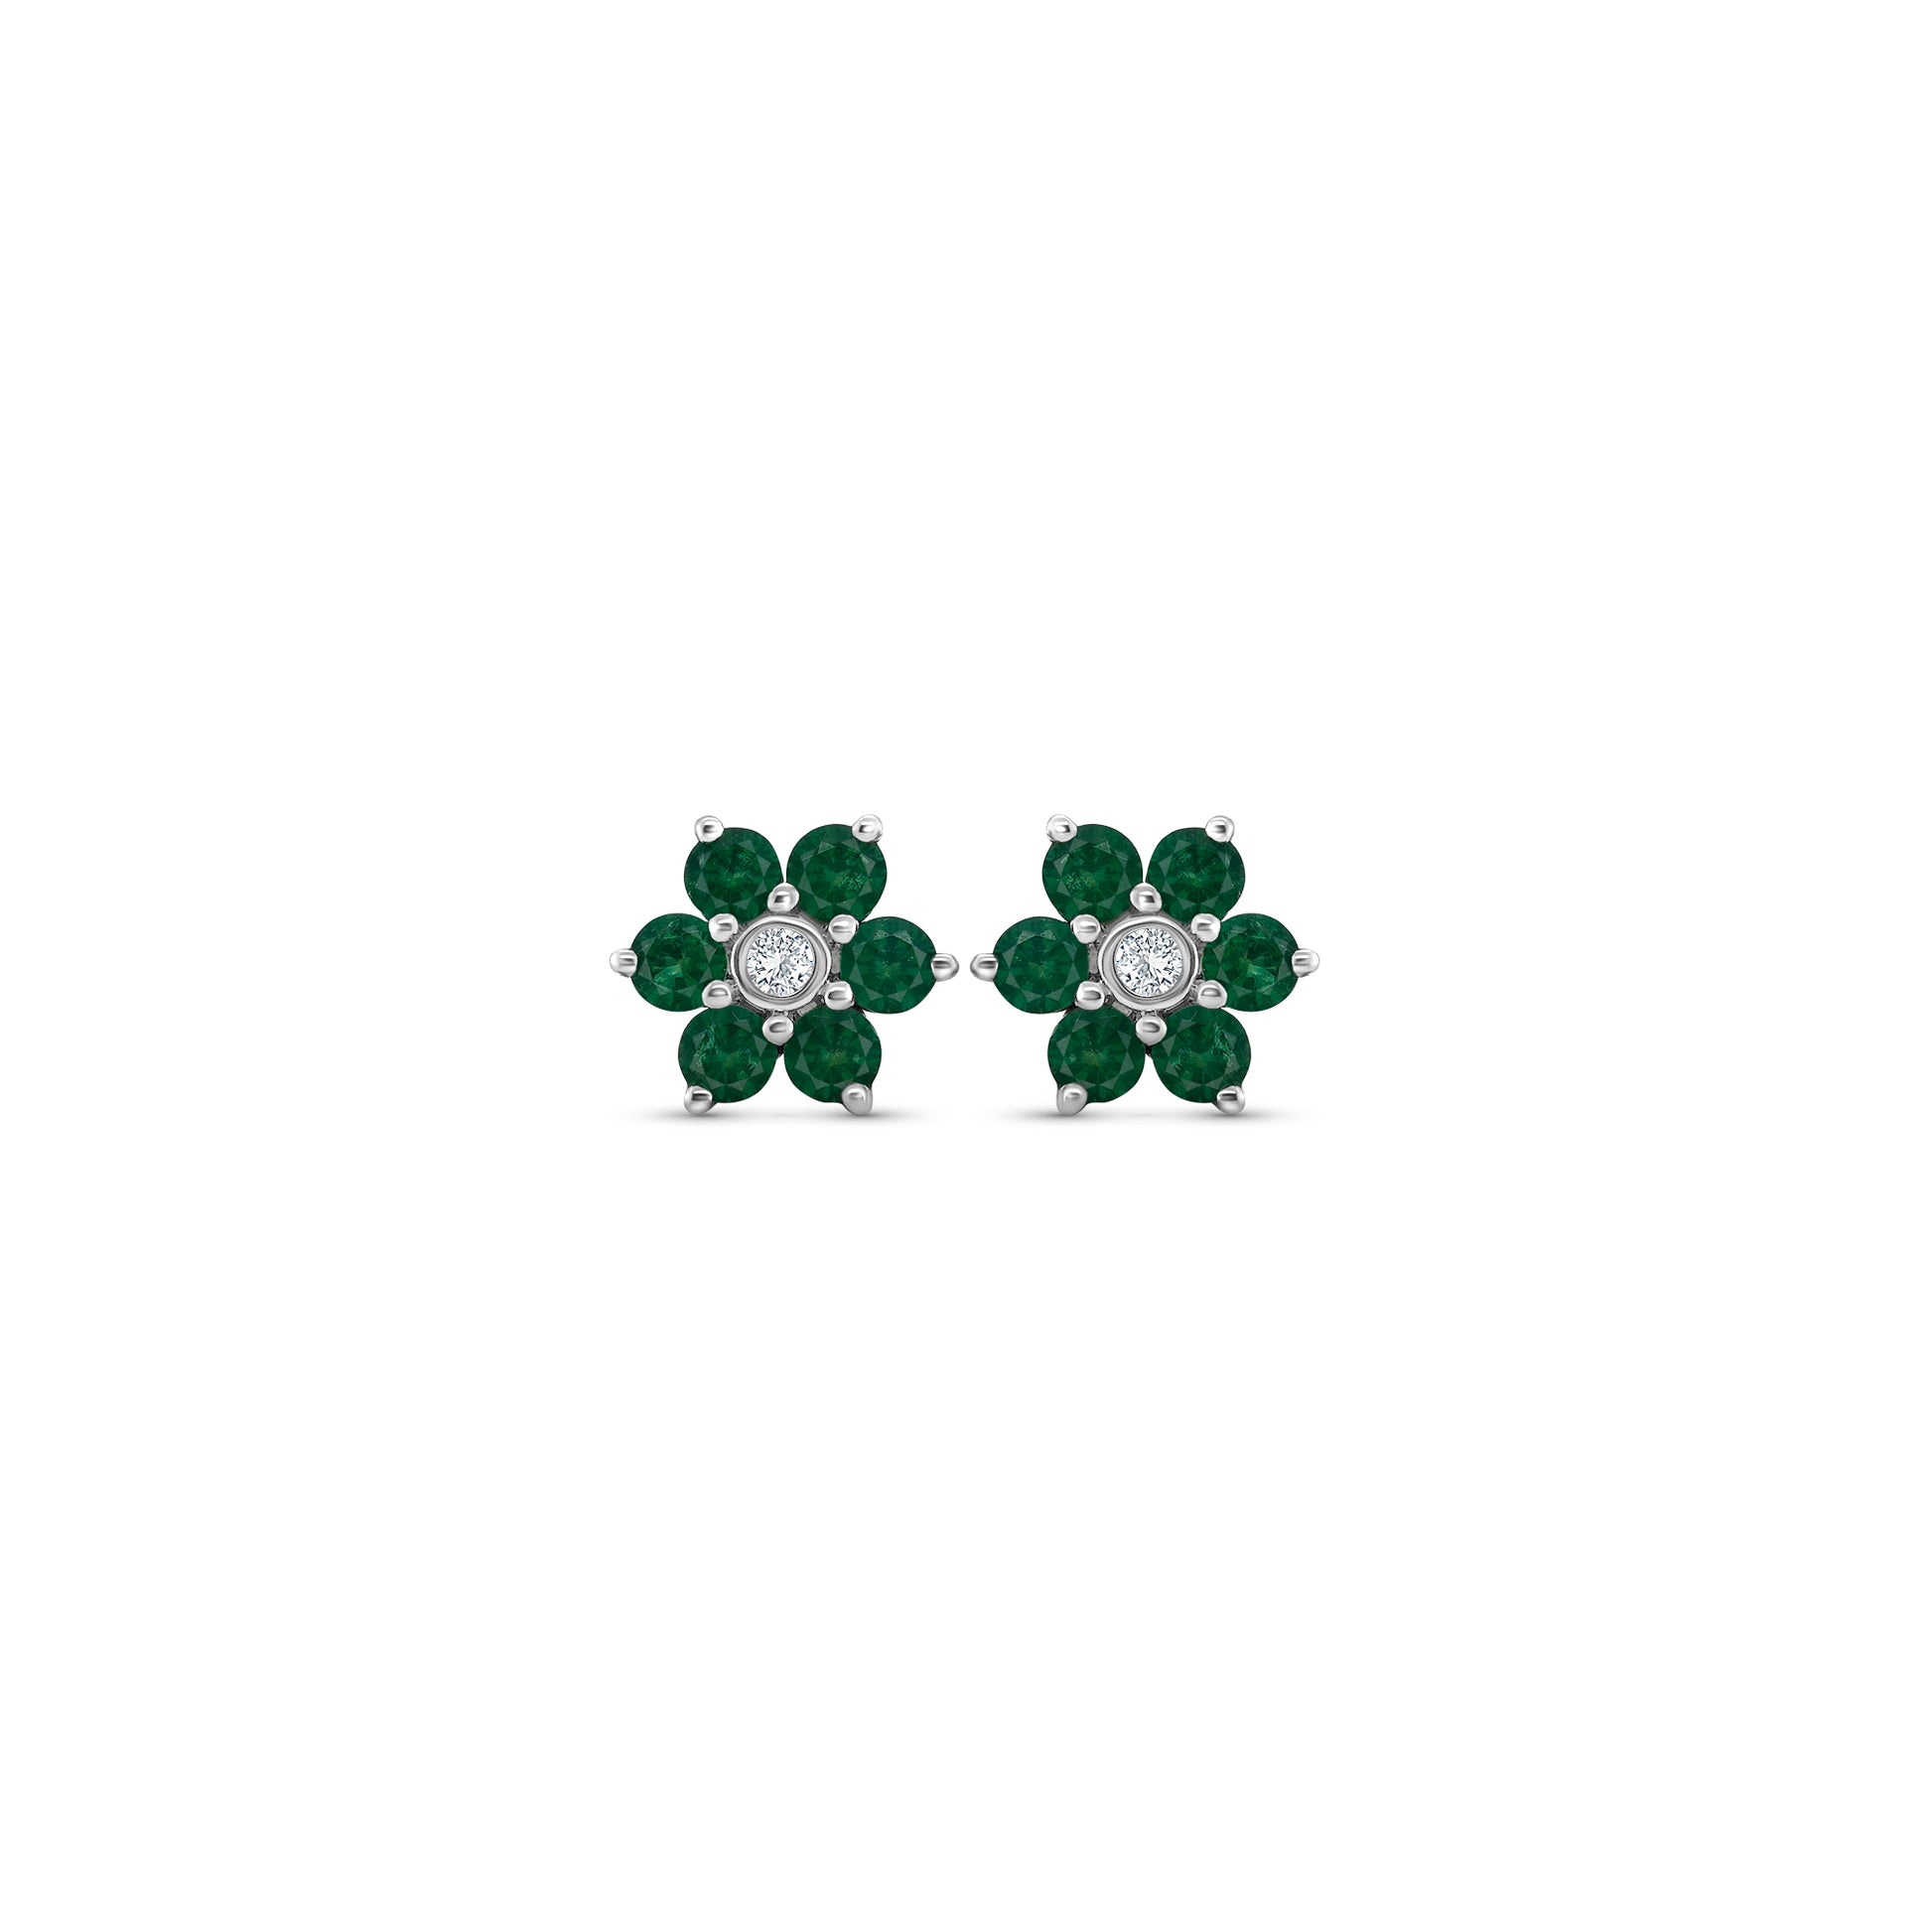 Emerald and diamond stud earrings, exquisite emerald earrings, sparkling diamond studs, elegant jewelry accessories, precious gemstone earrings, luxurious emerald and diamond jewelry, timeless stud earrings, radiant emerald studs, dazzling diamond accents.